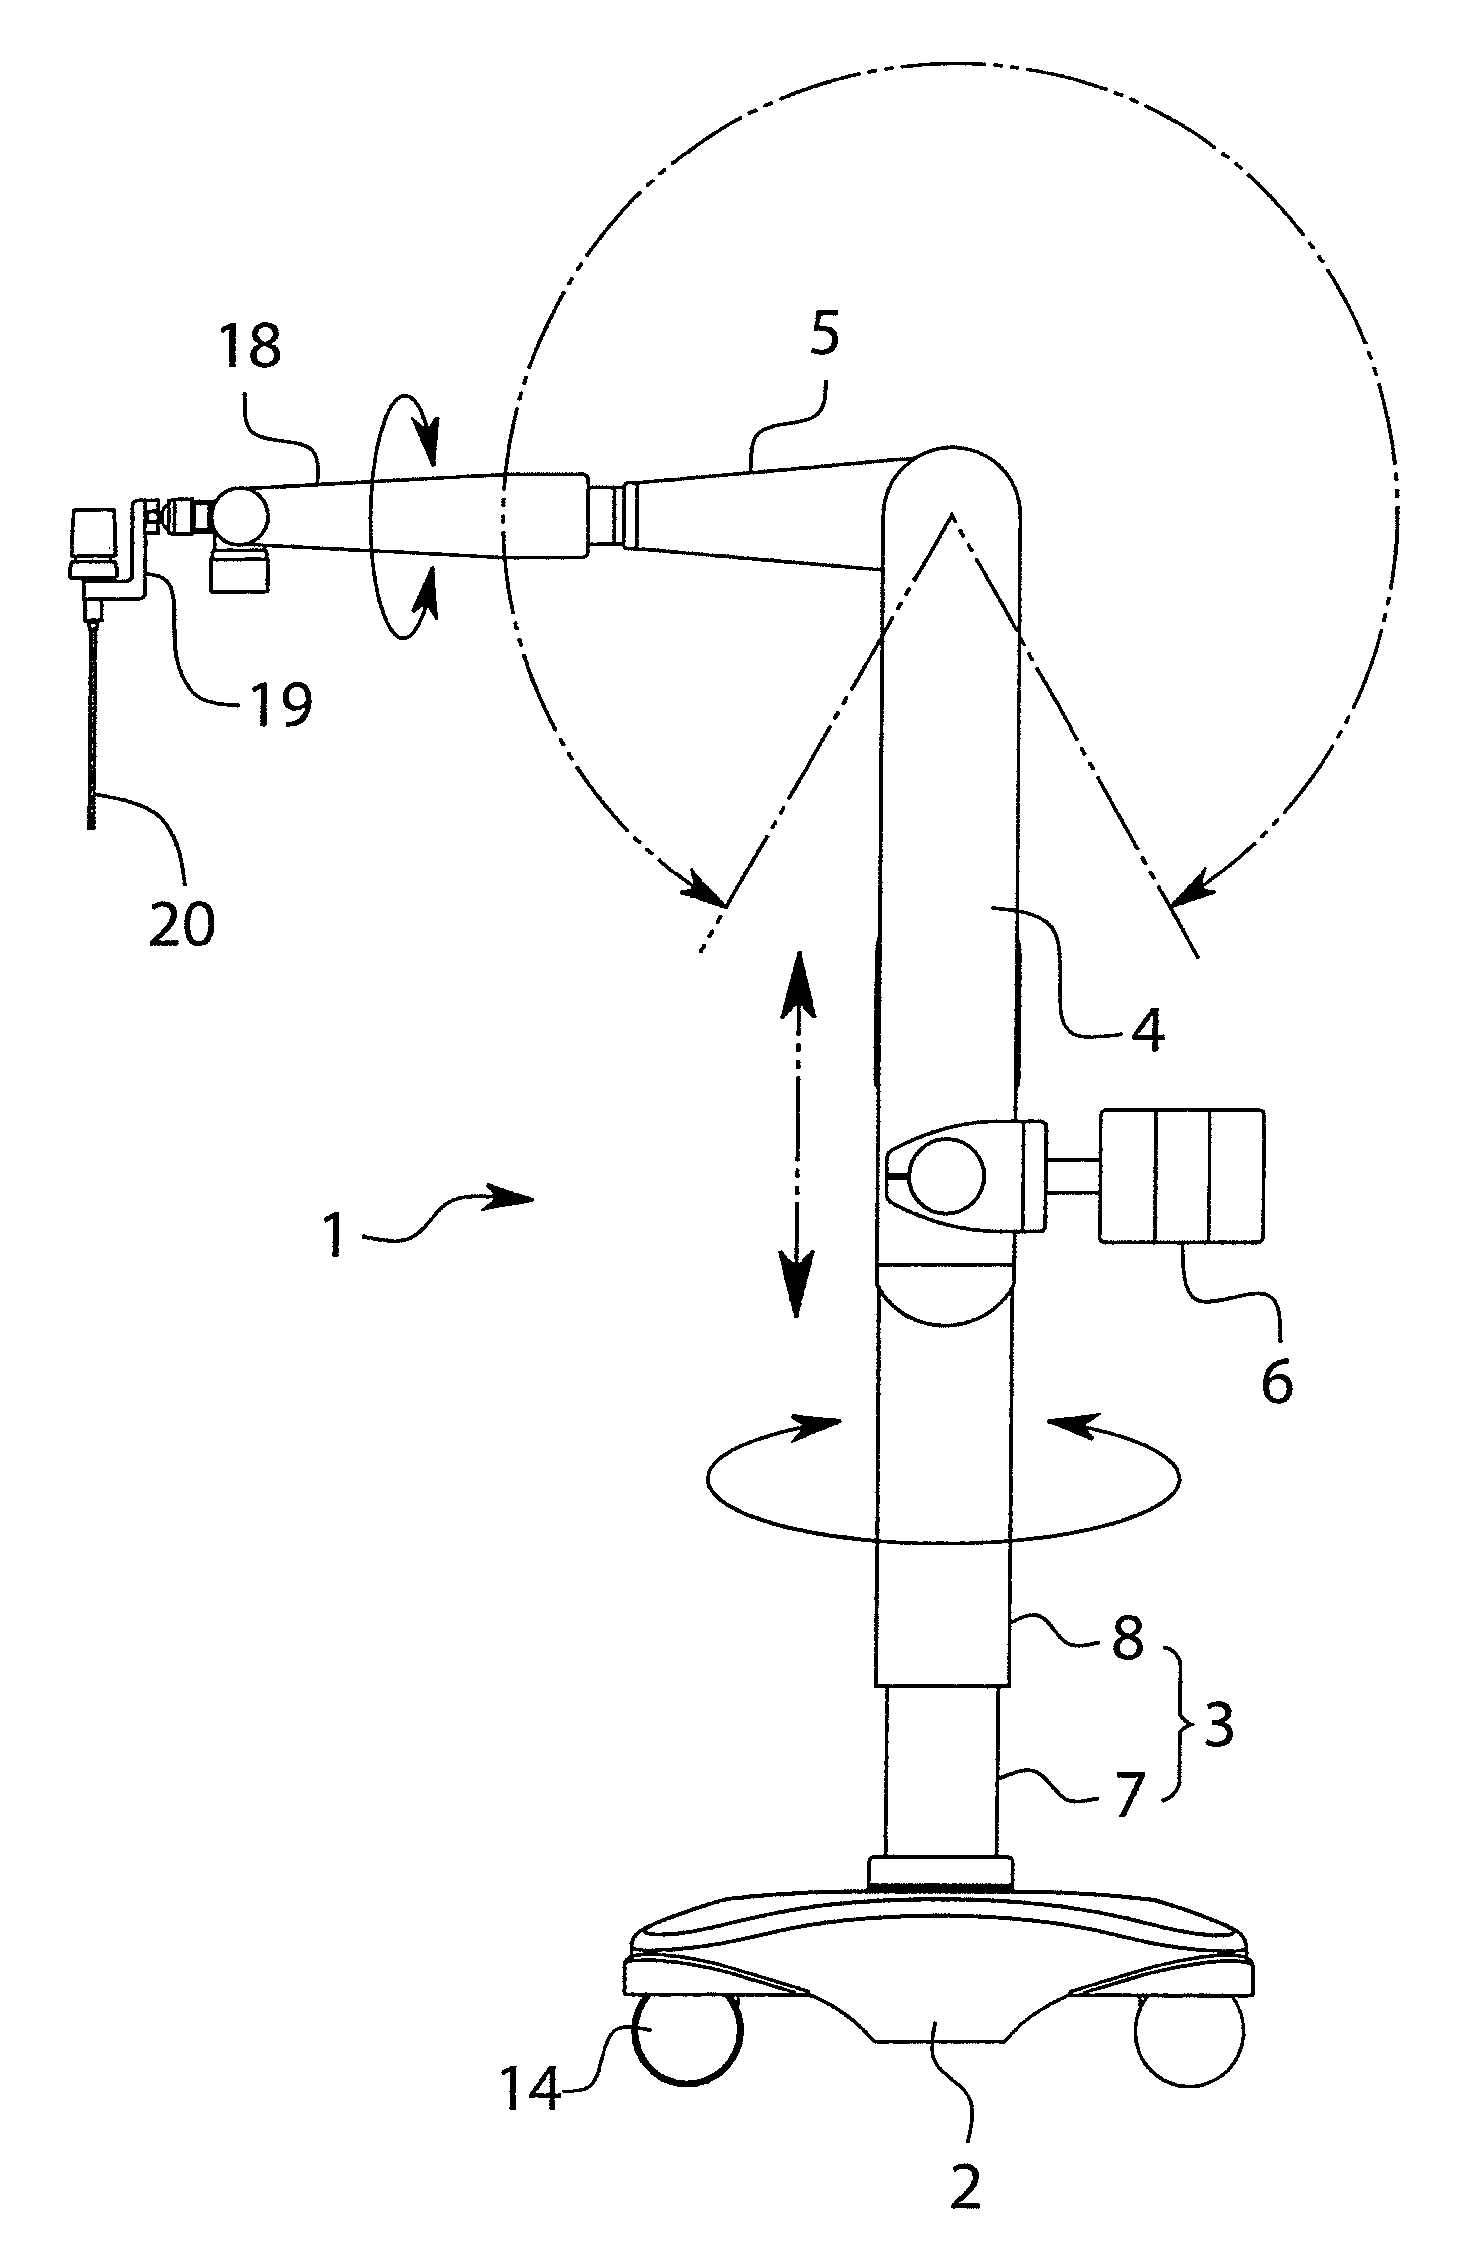 Holding arm apparatus for medical tool